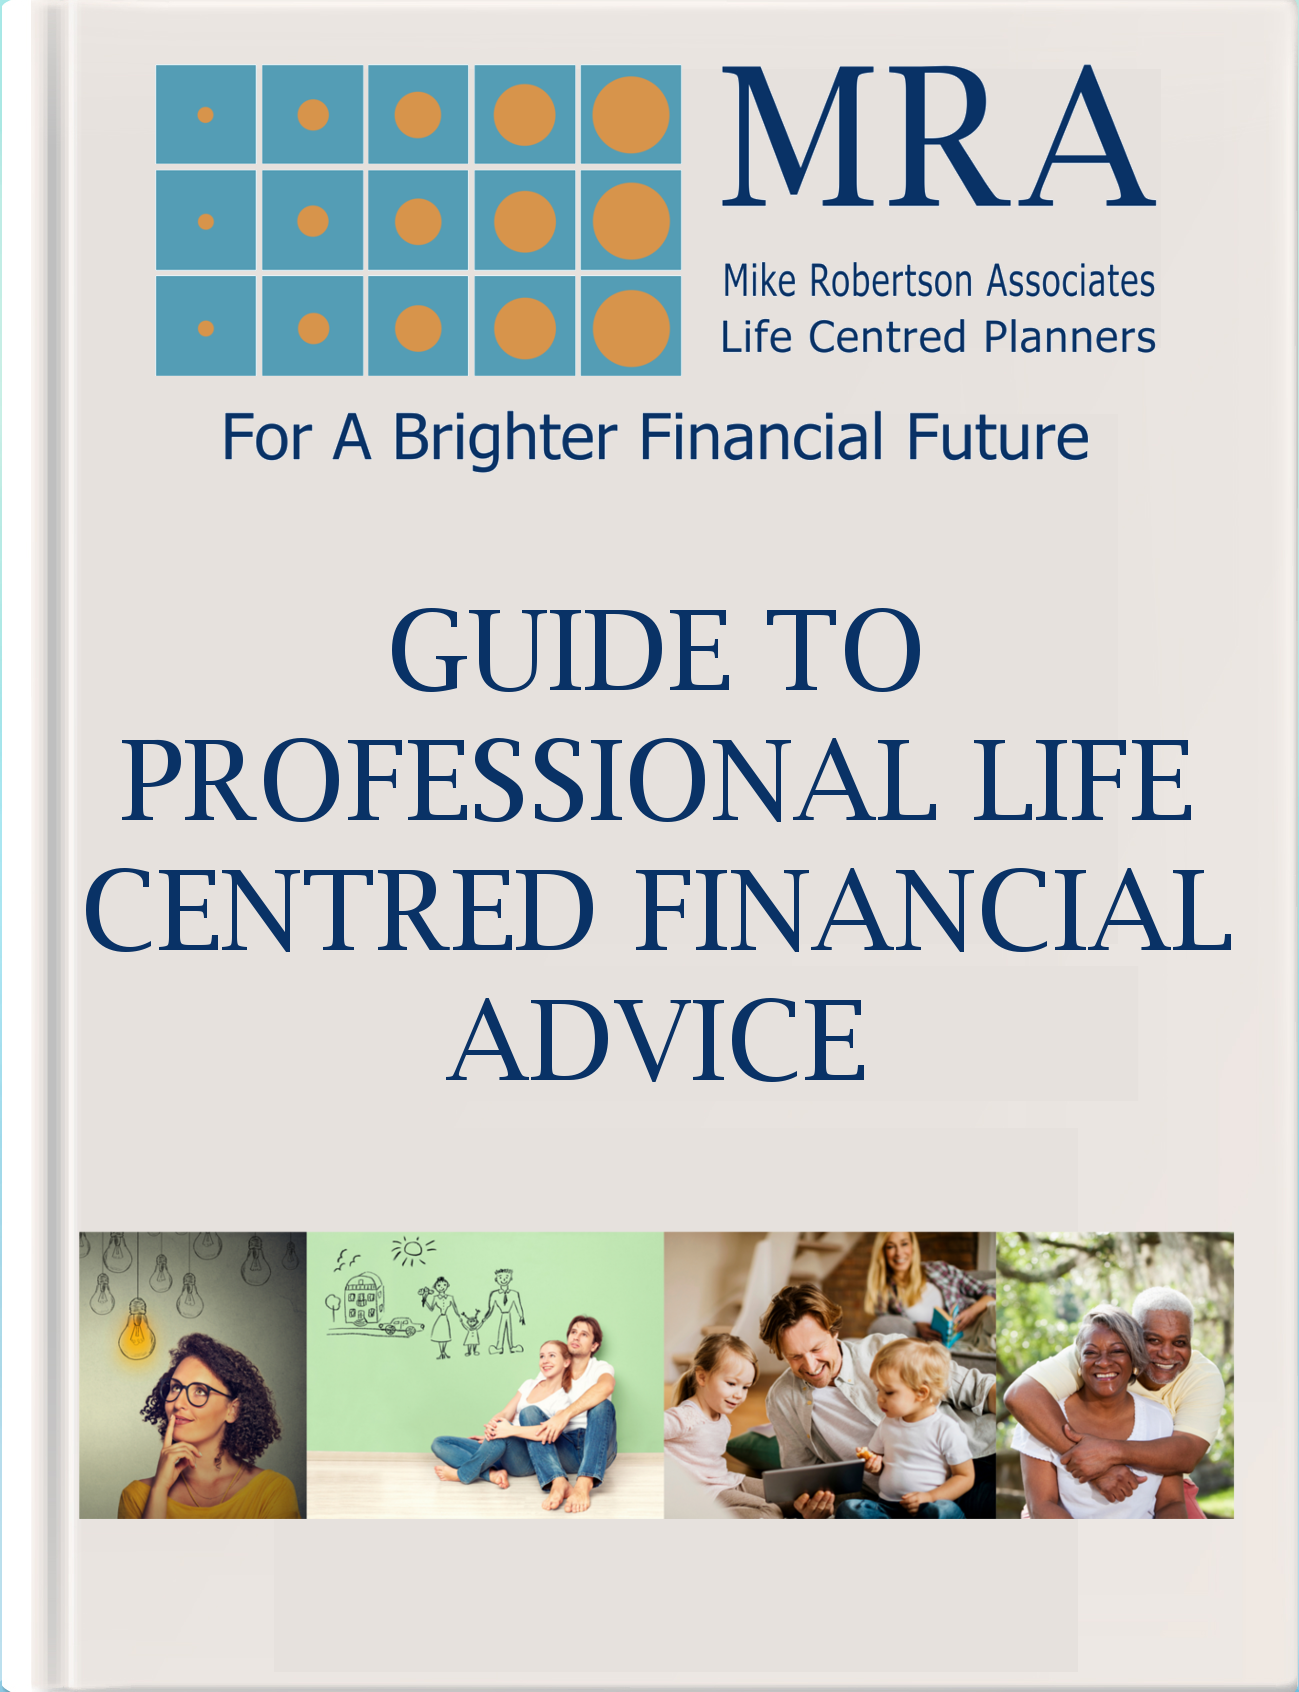 Download our Guide to Professional Financial Advice